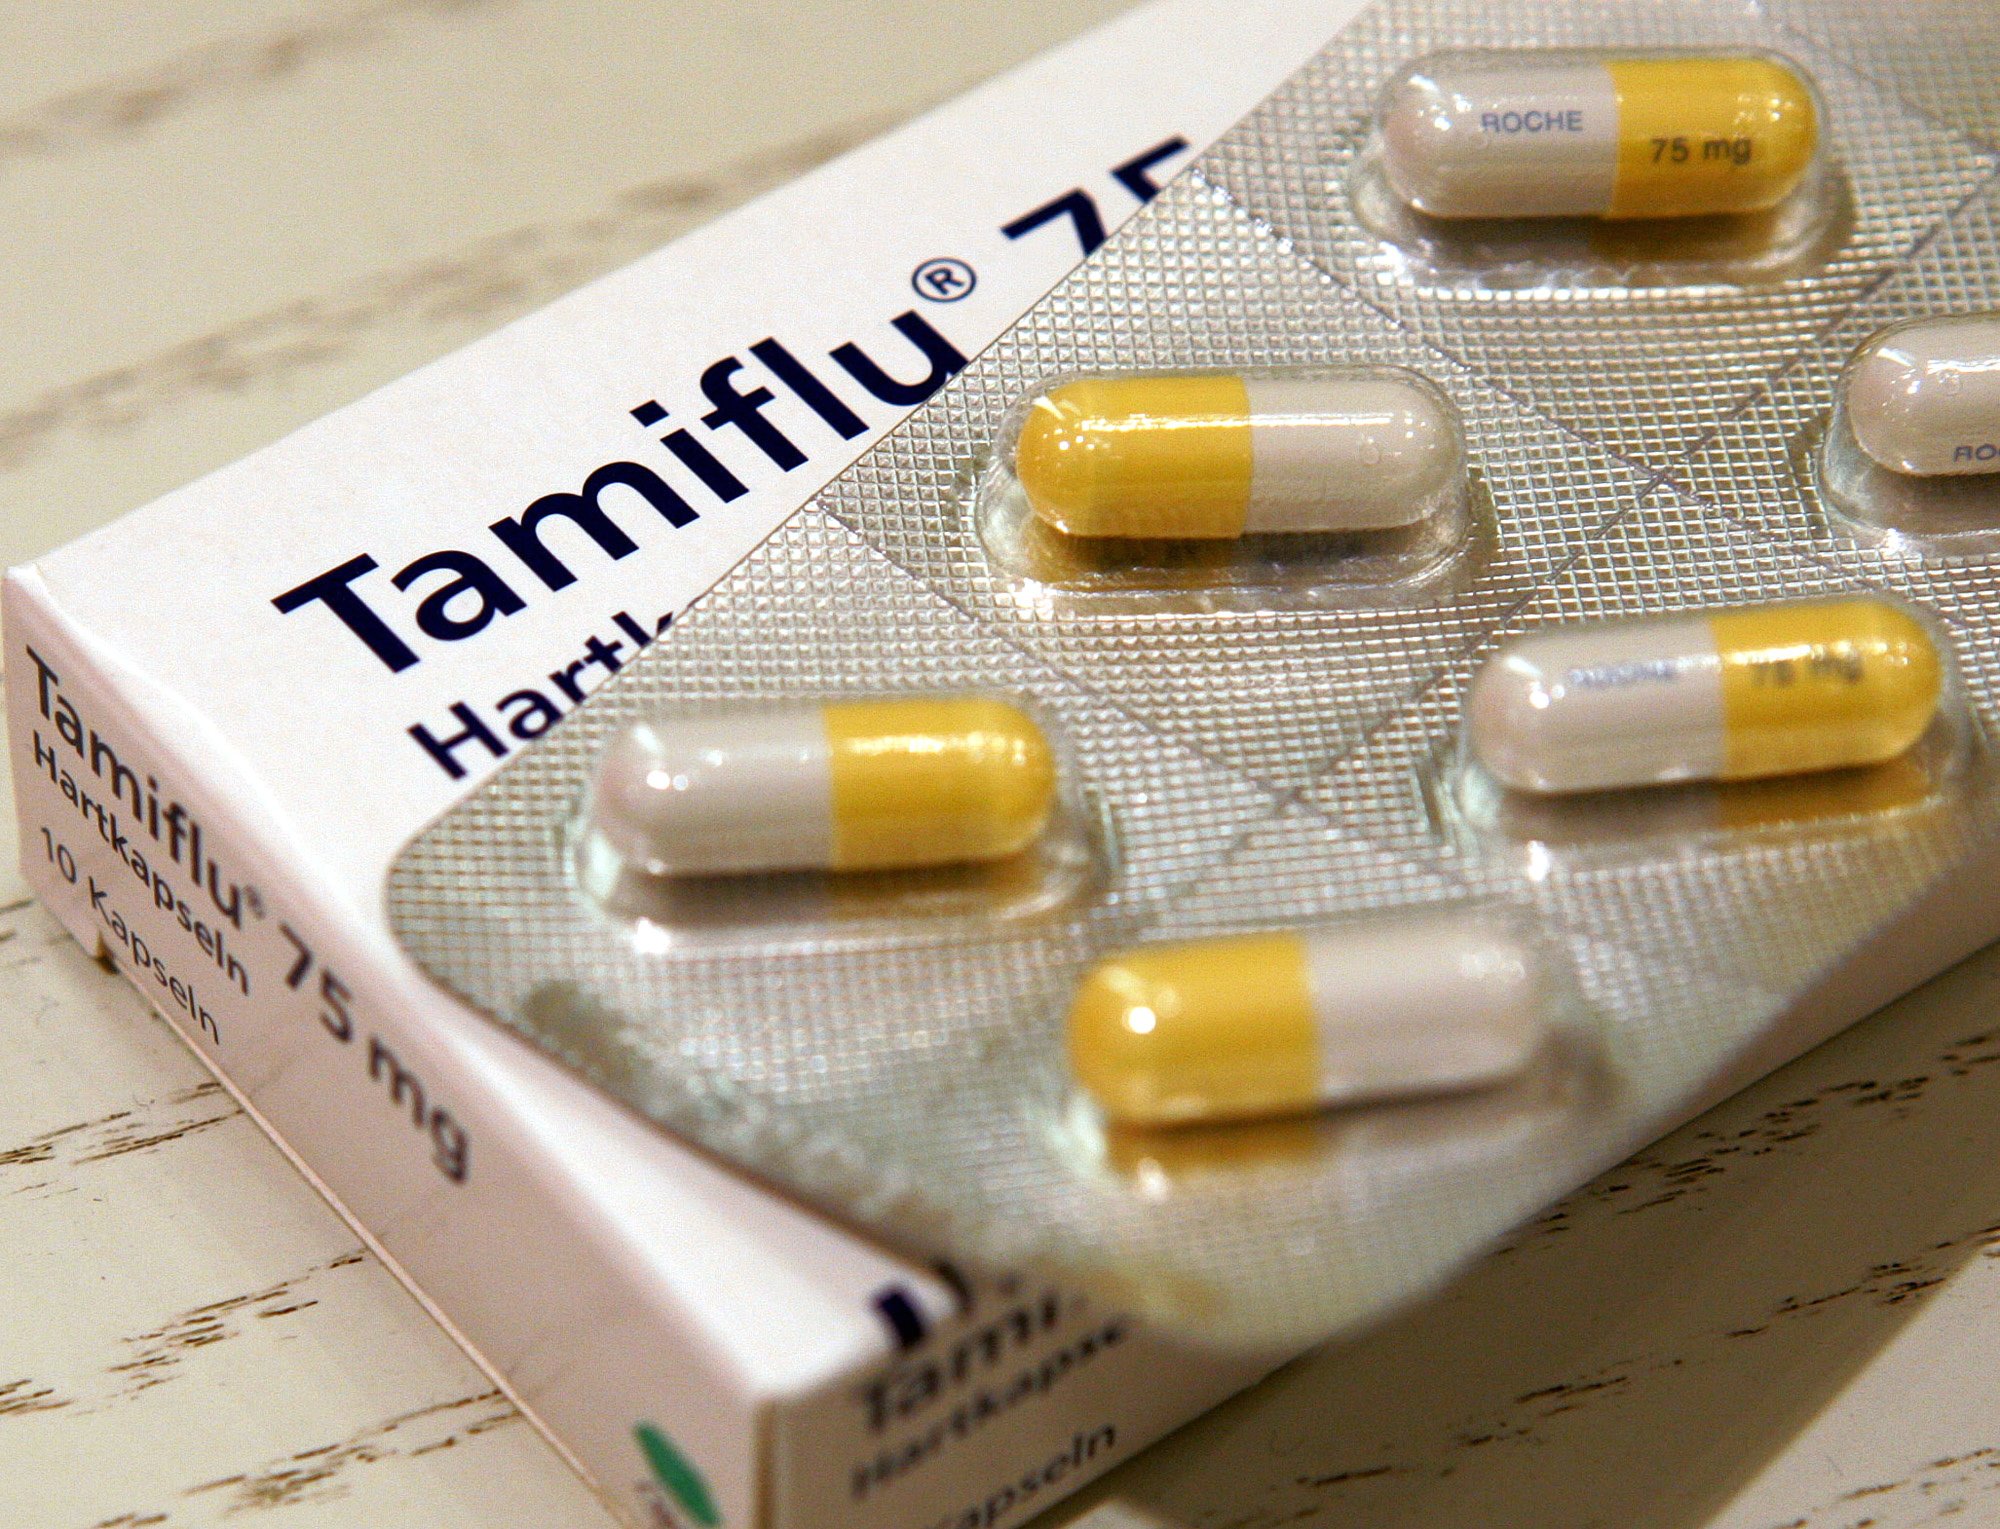 Side Effects of Tamiflu; Is It Okay to Take?